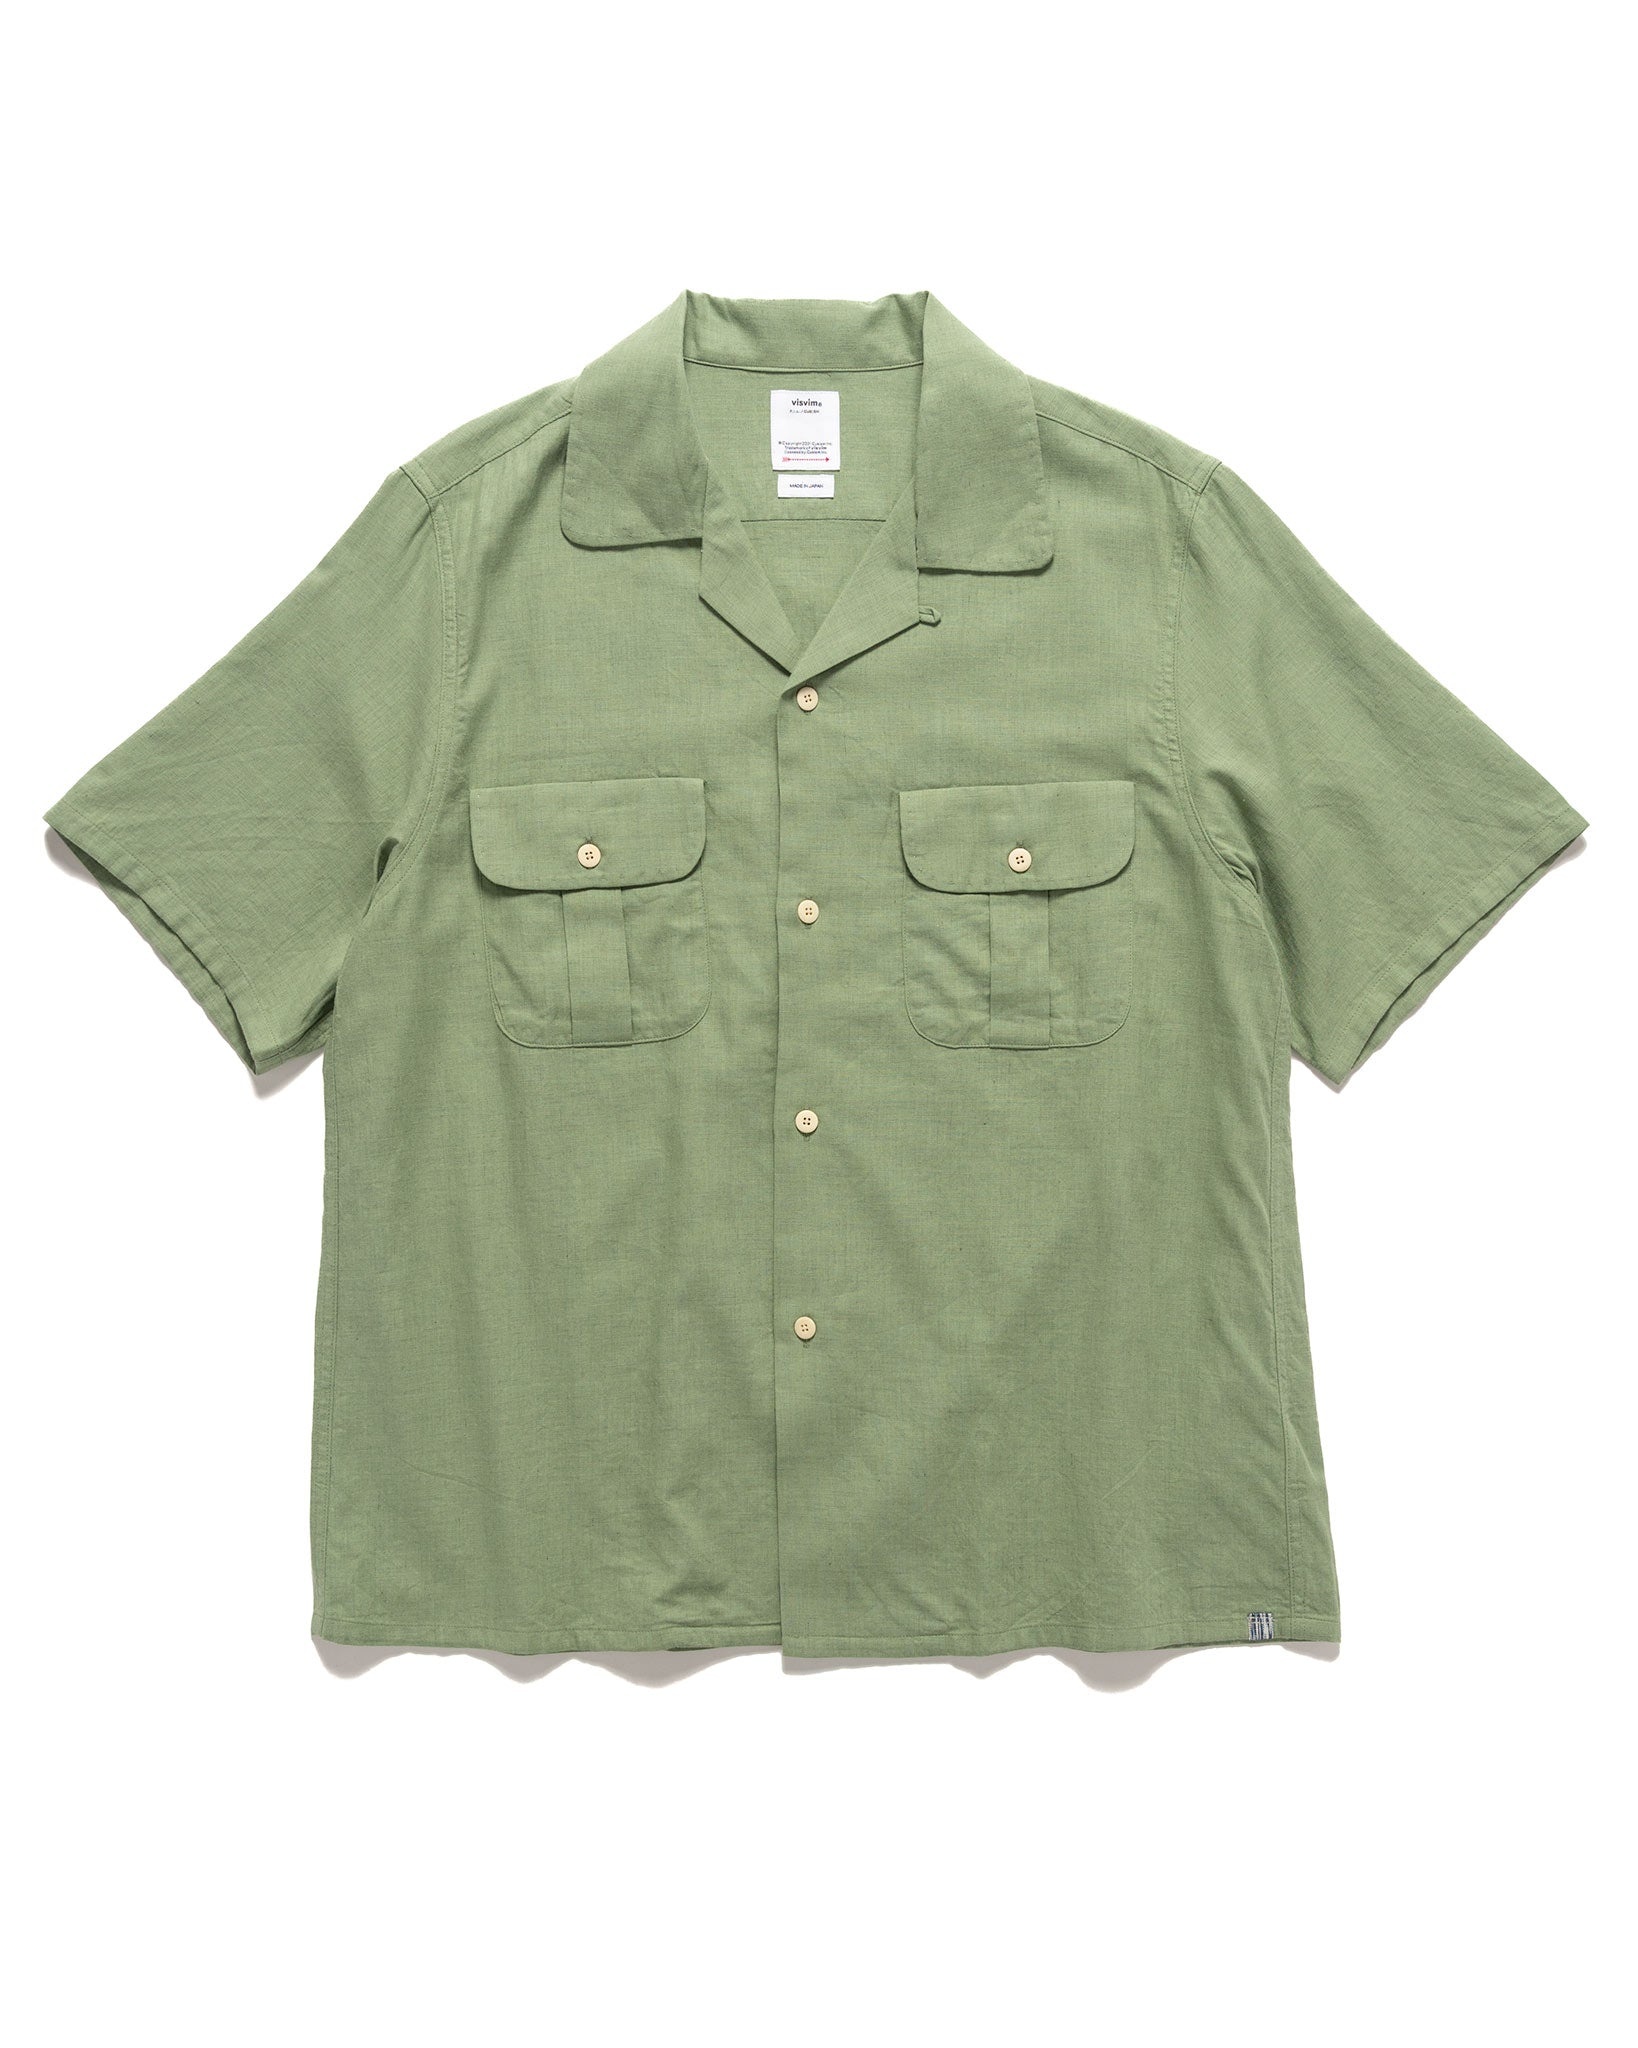 Keesey G.S. Shirt S/S Green - 1